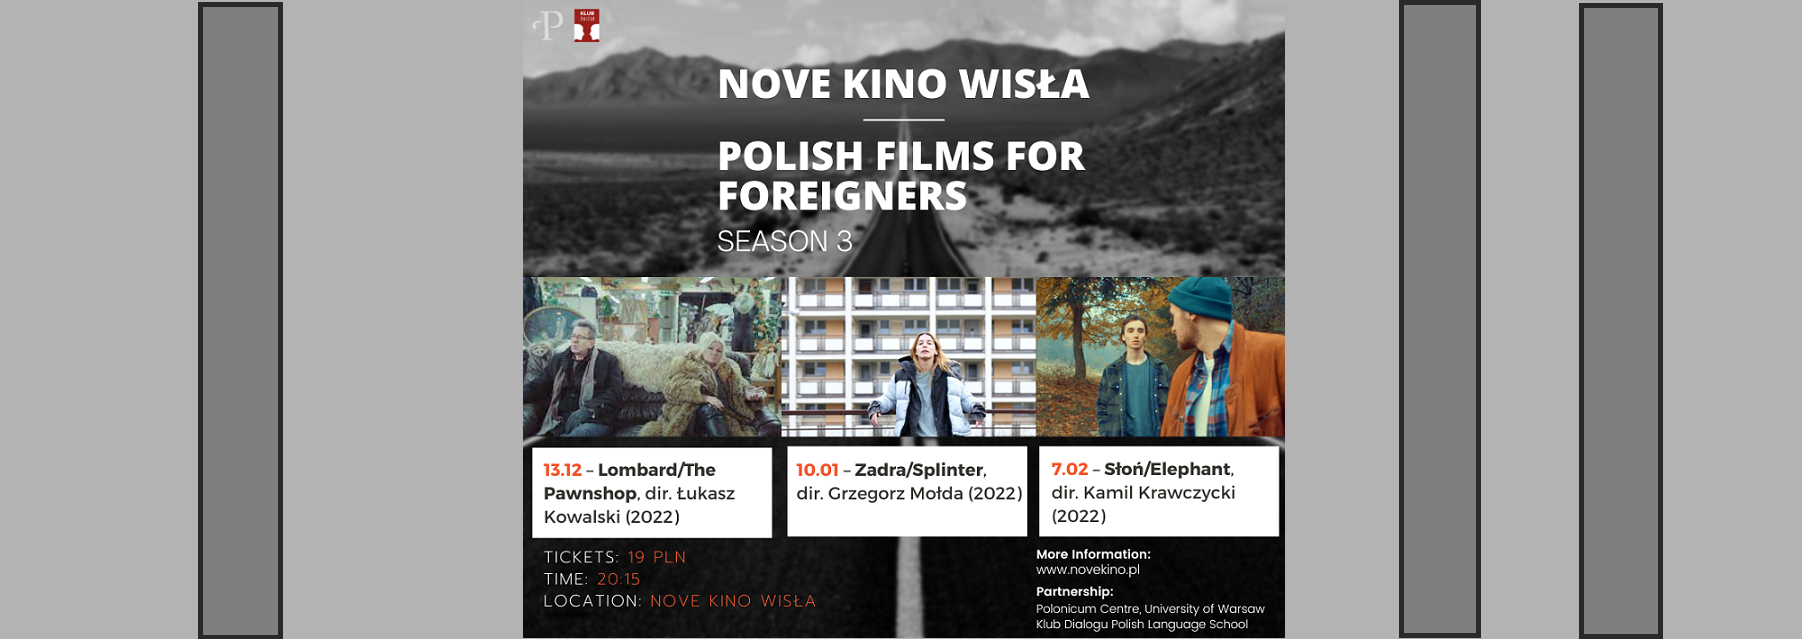 polish films for foreigners